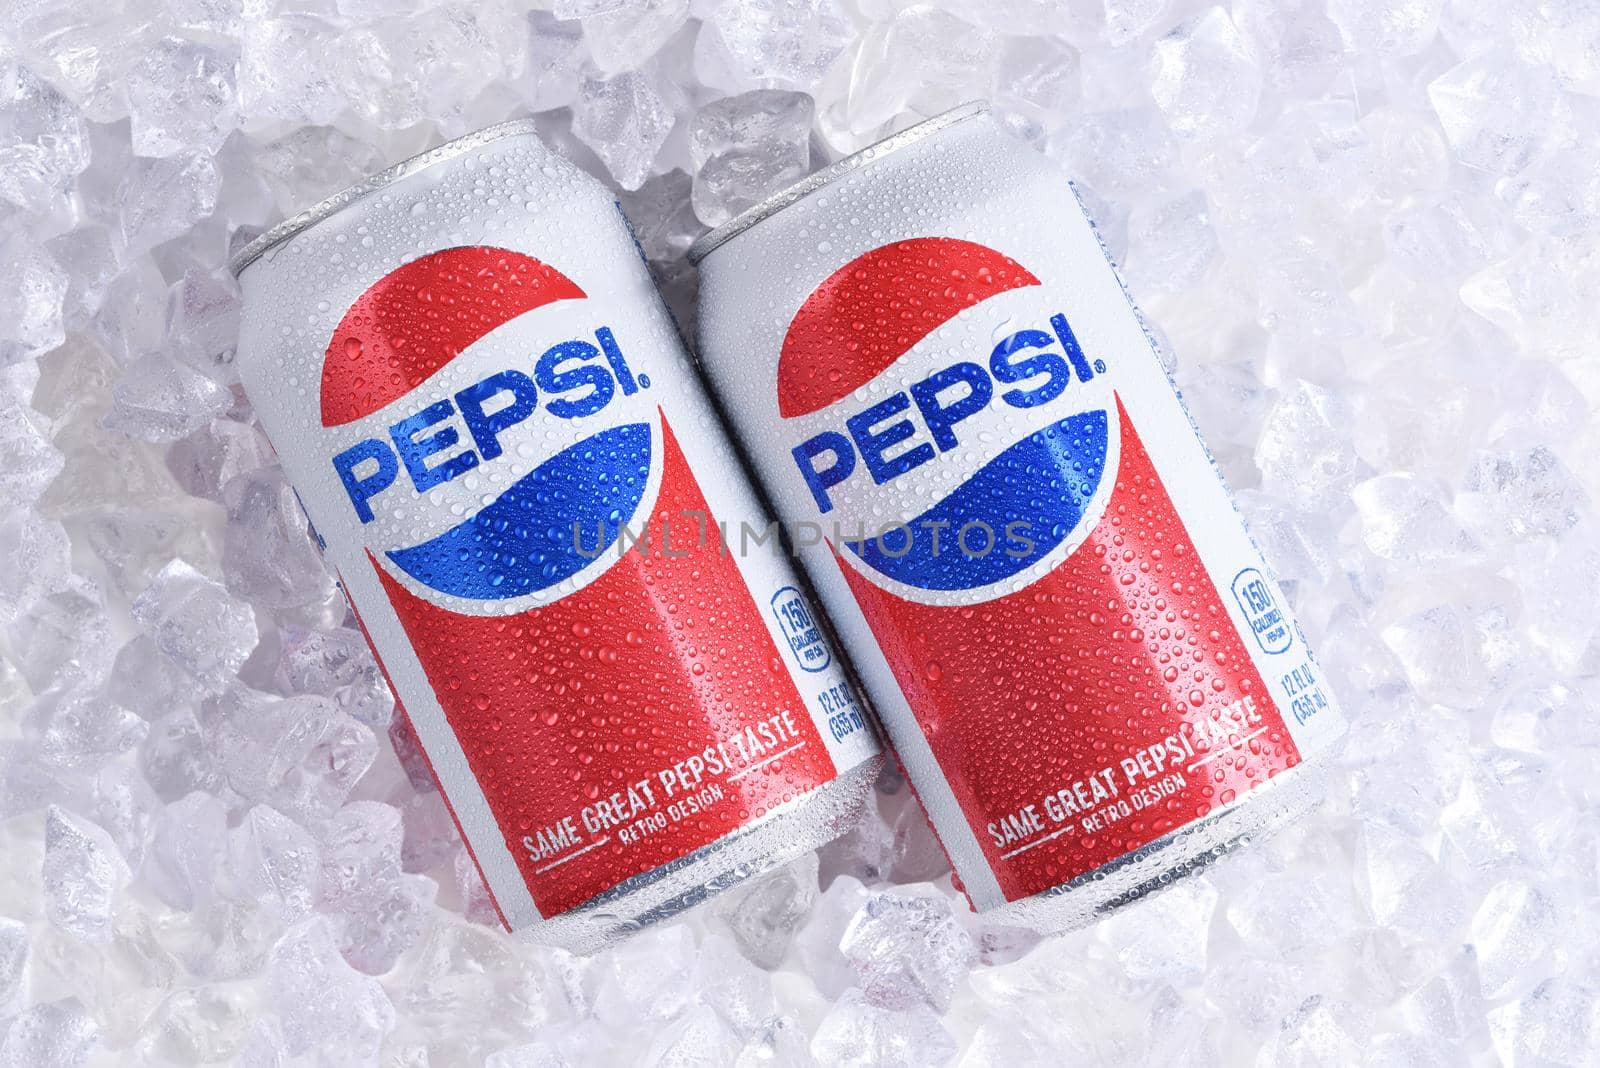 IRVINE, CALIFORNIA - MAY 23, 2018: Two cans of Pepsi-Cola on ice. Pepsi is one of the leading producers of soda and soft drinks in the USA.